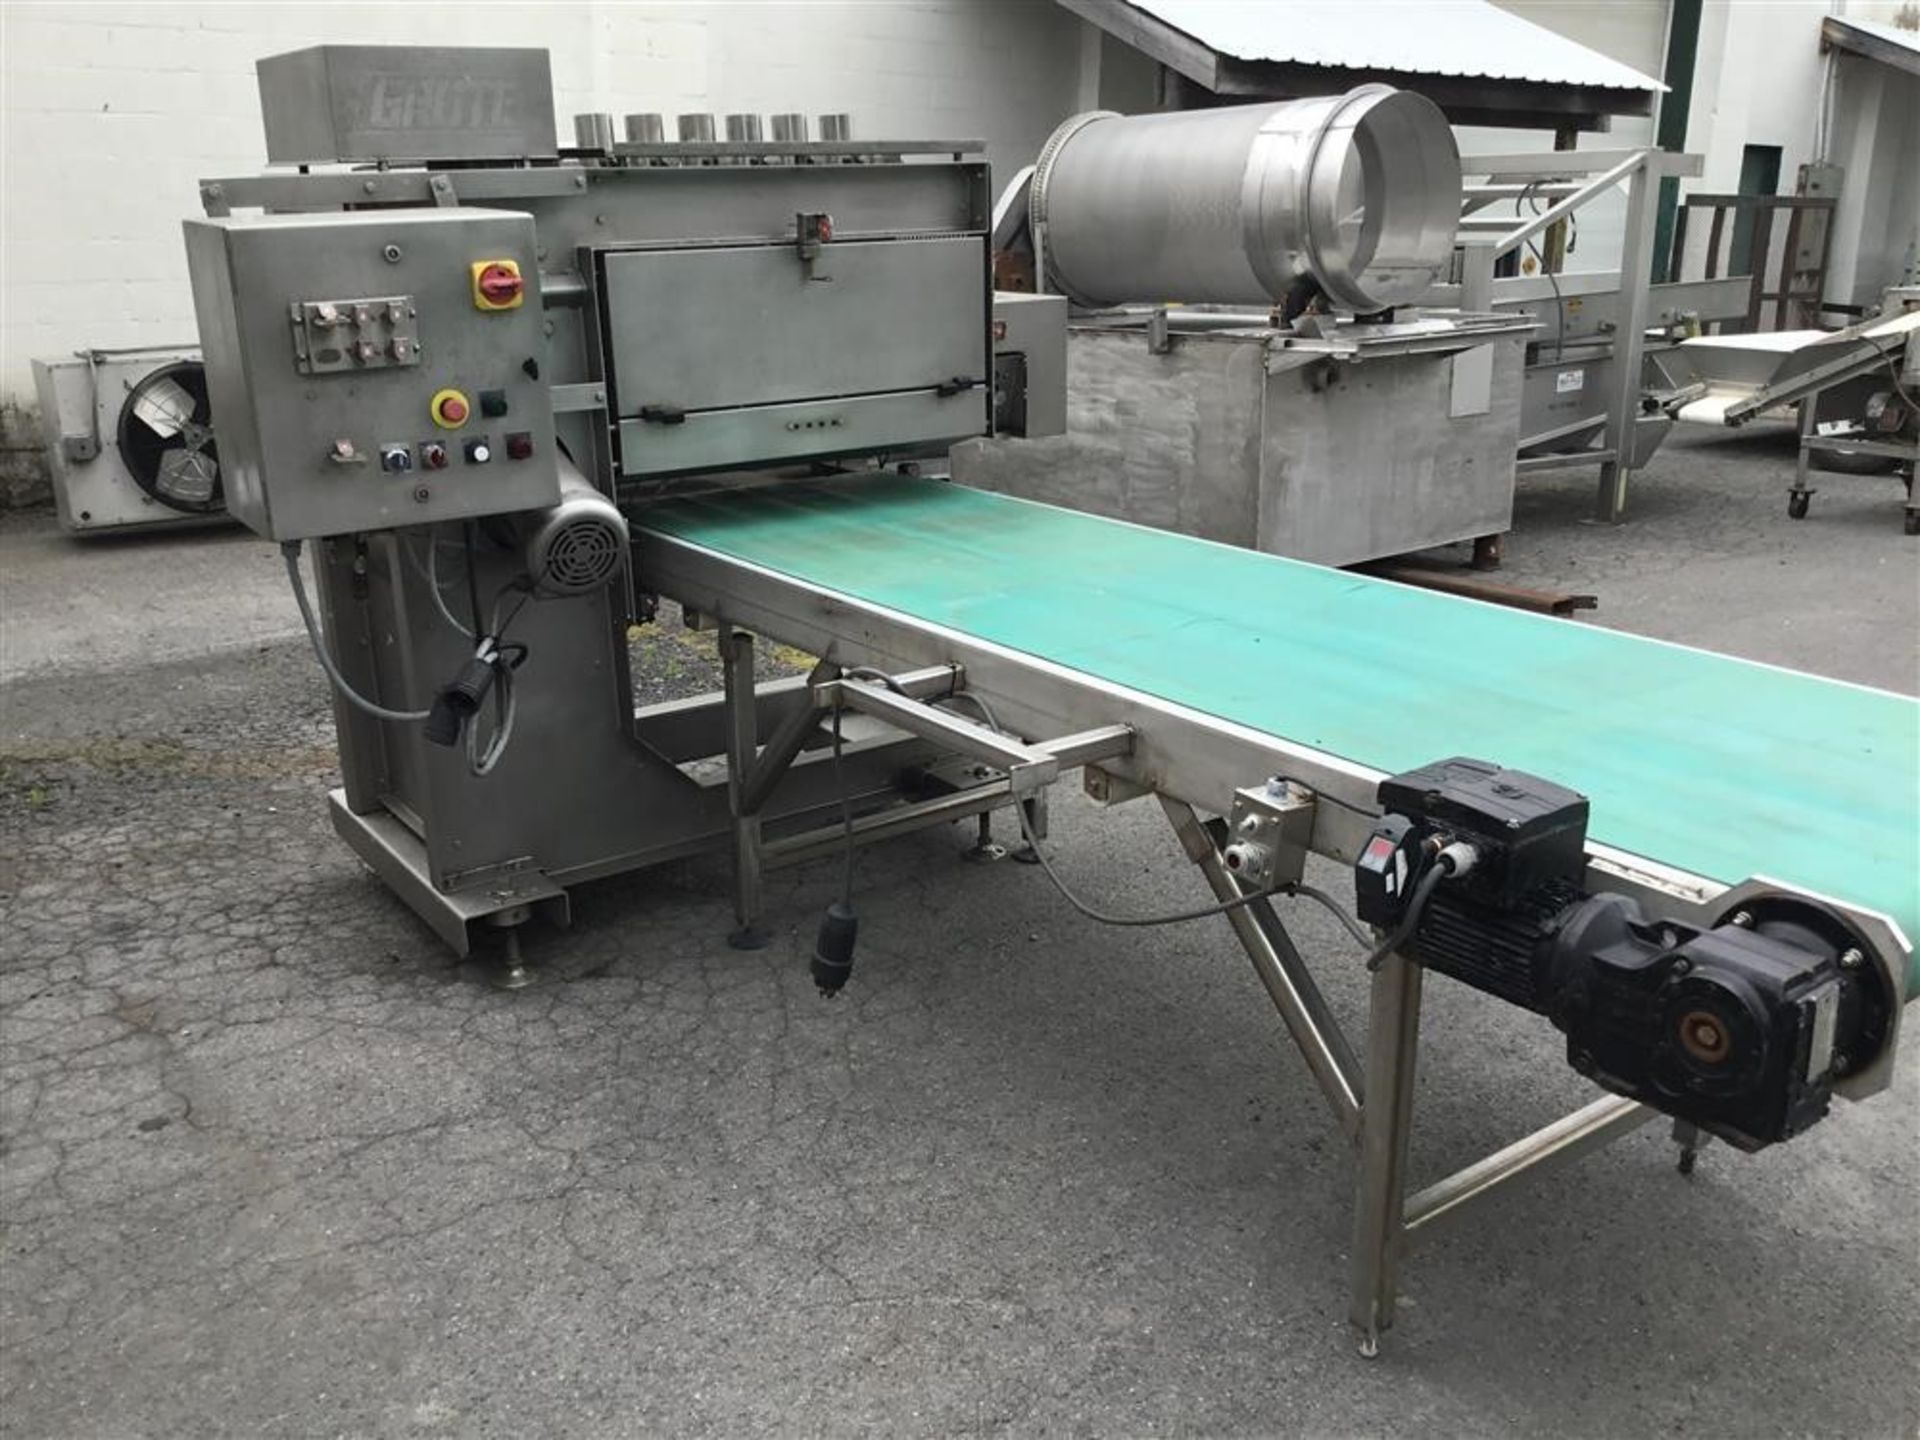 Grote Onion Slicer for Precision Slices, Model FPS-1000, S/N 1125241 with New Slicing Knife Comes